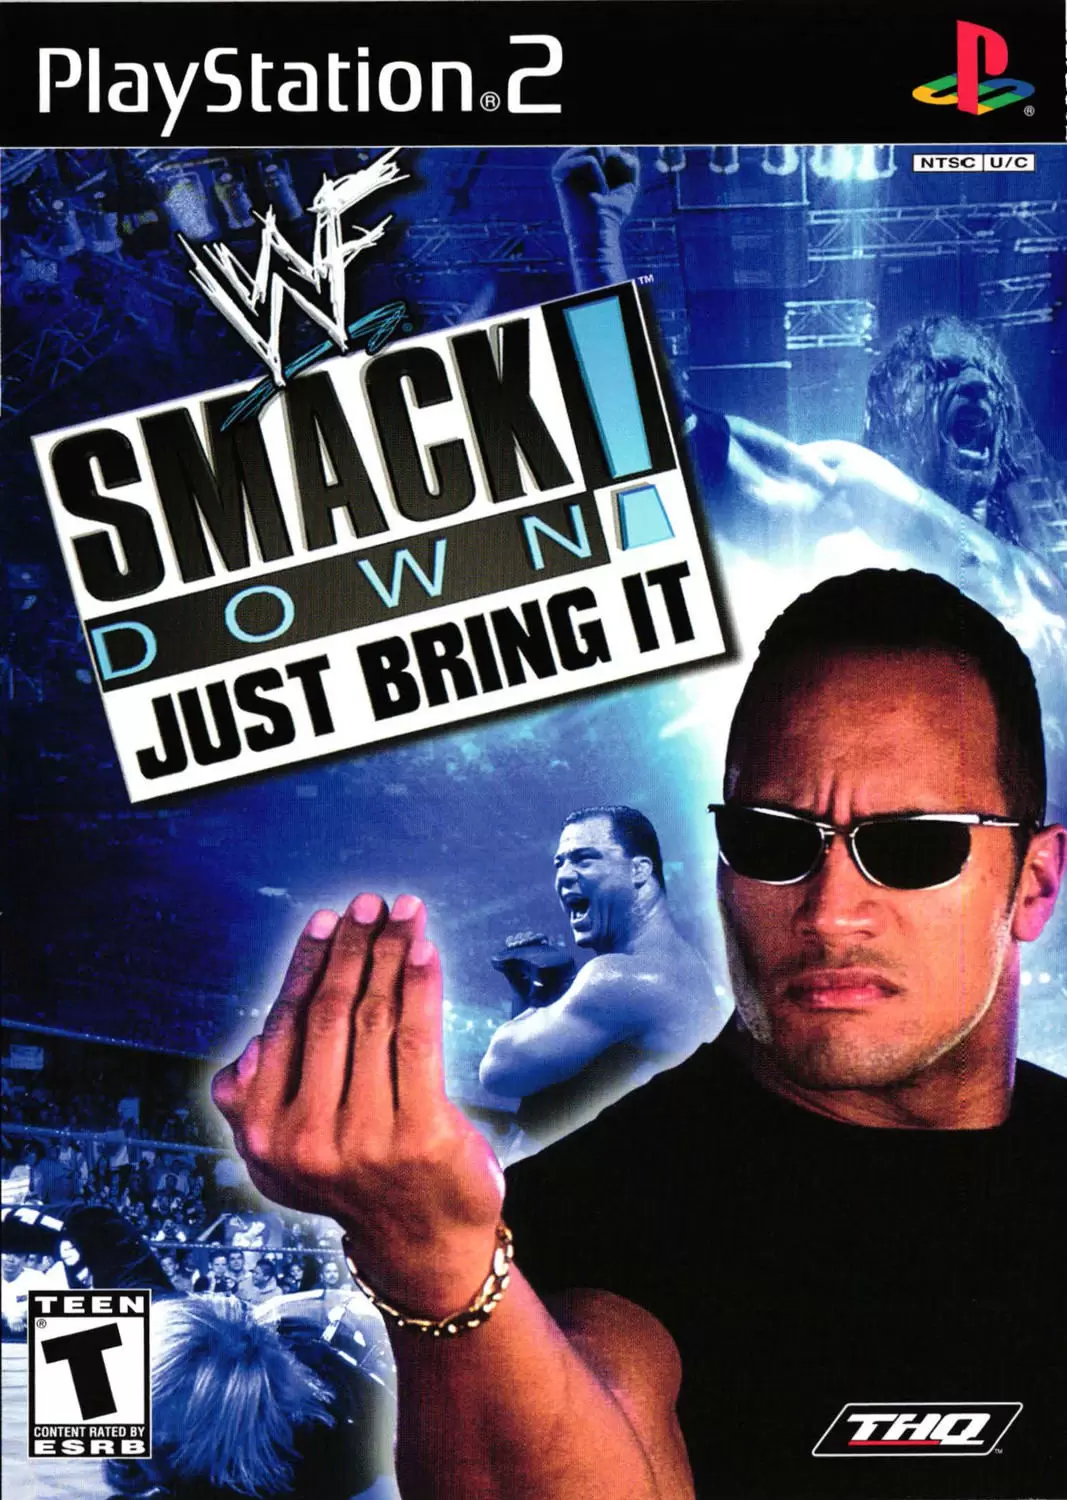 PS2 Games - WWF SmackDown! Just Bring It